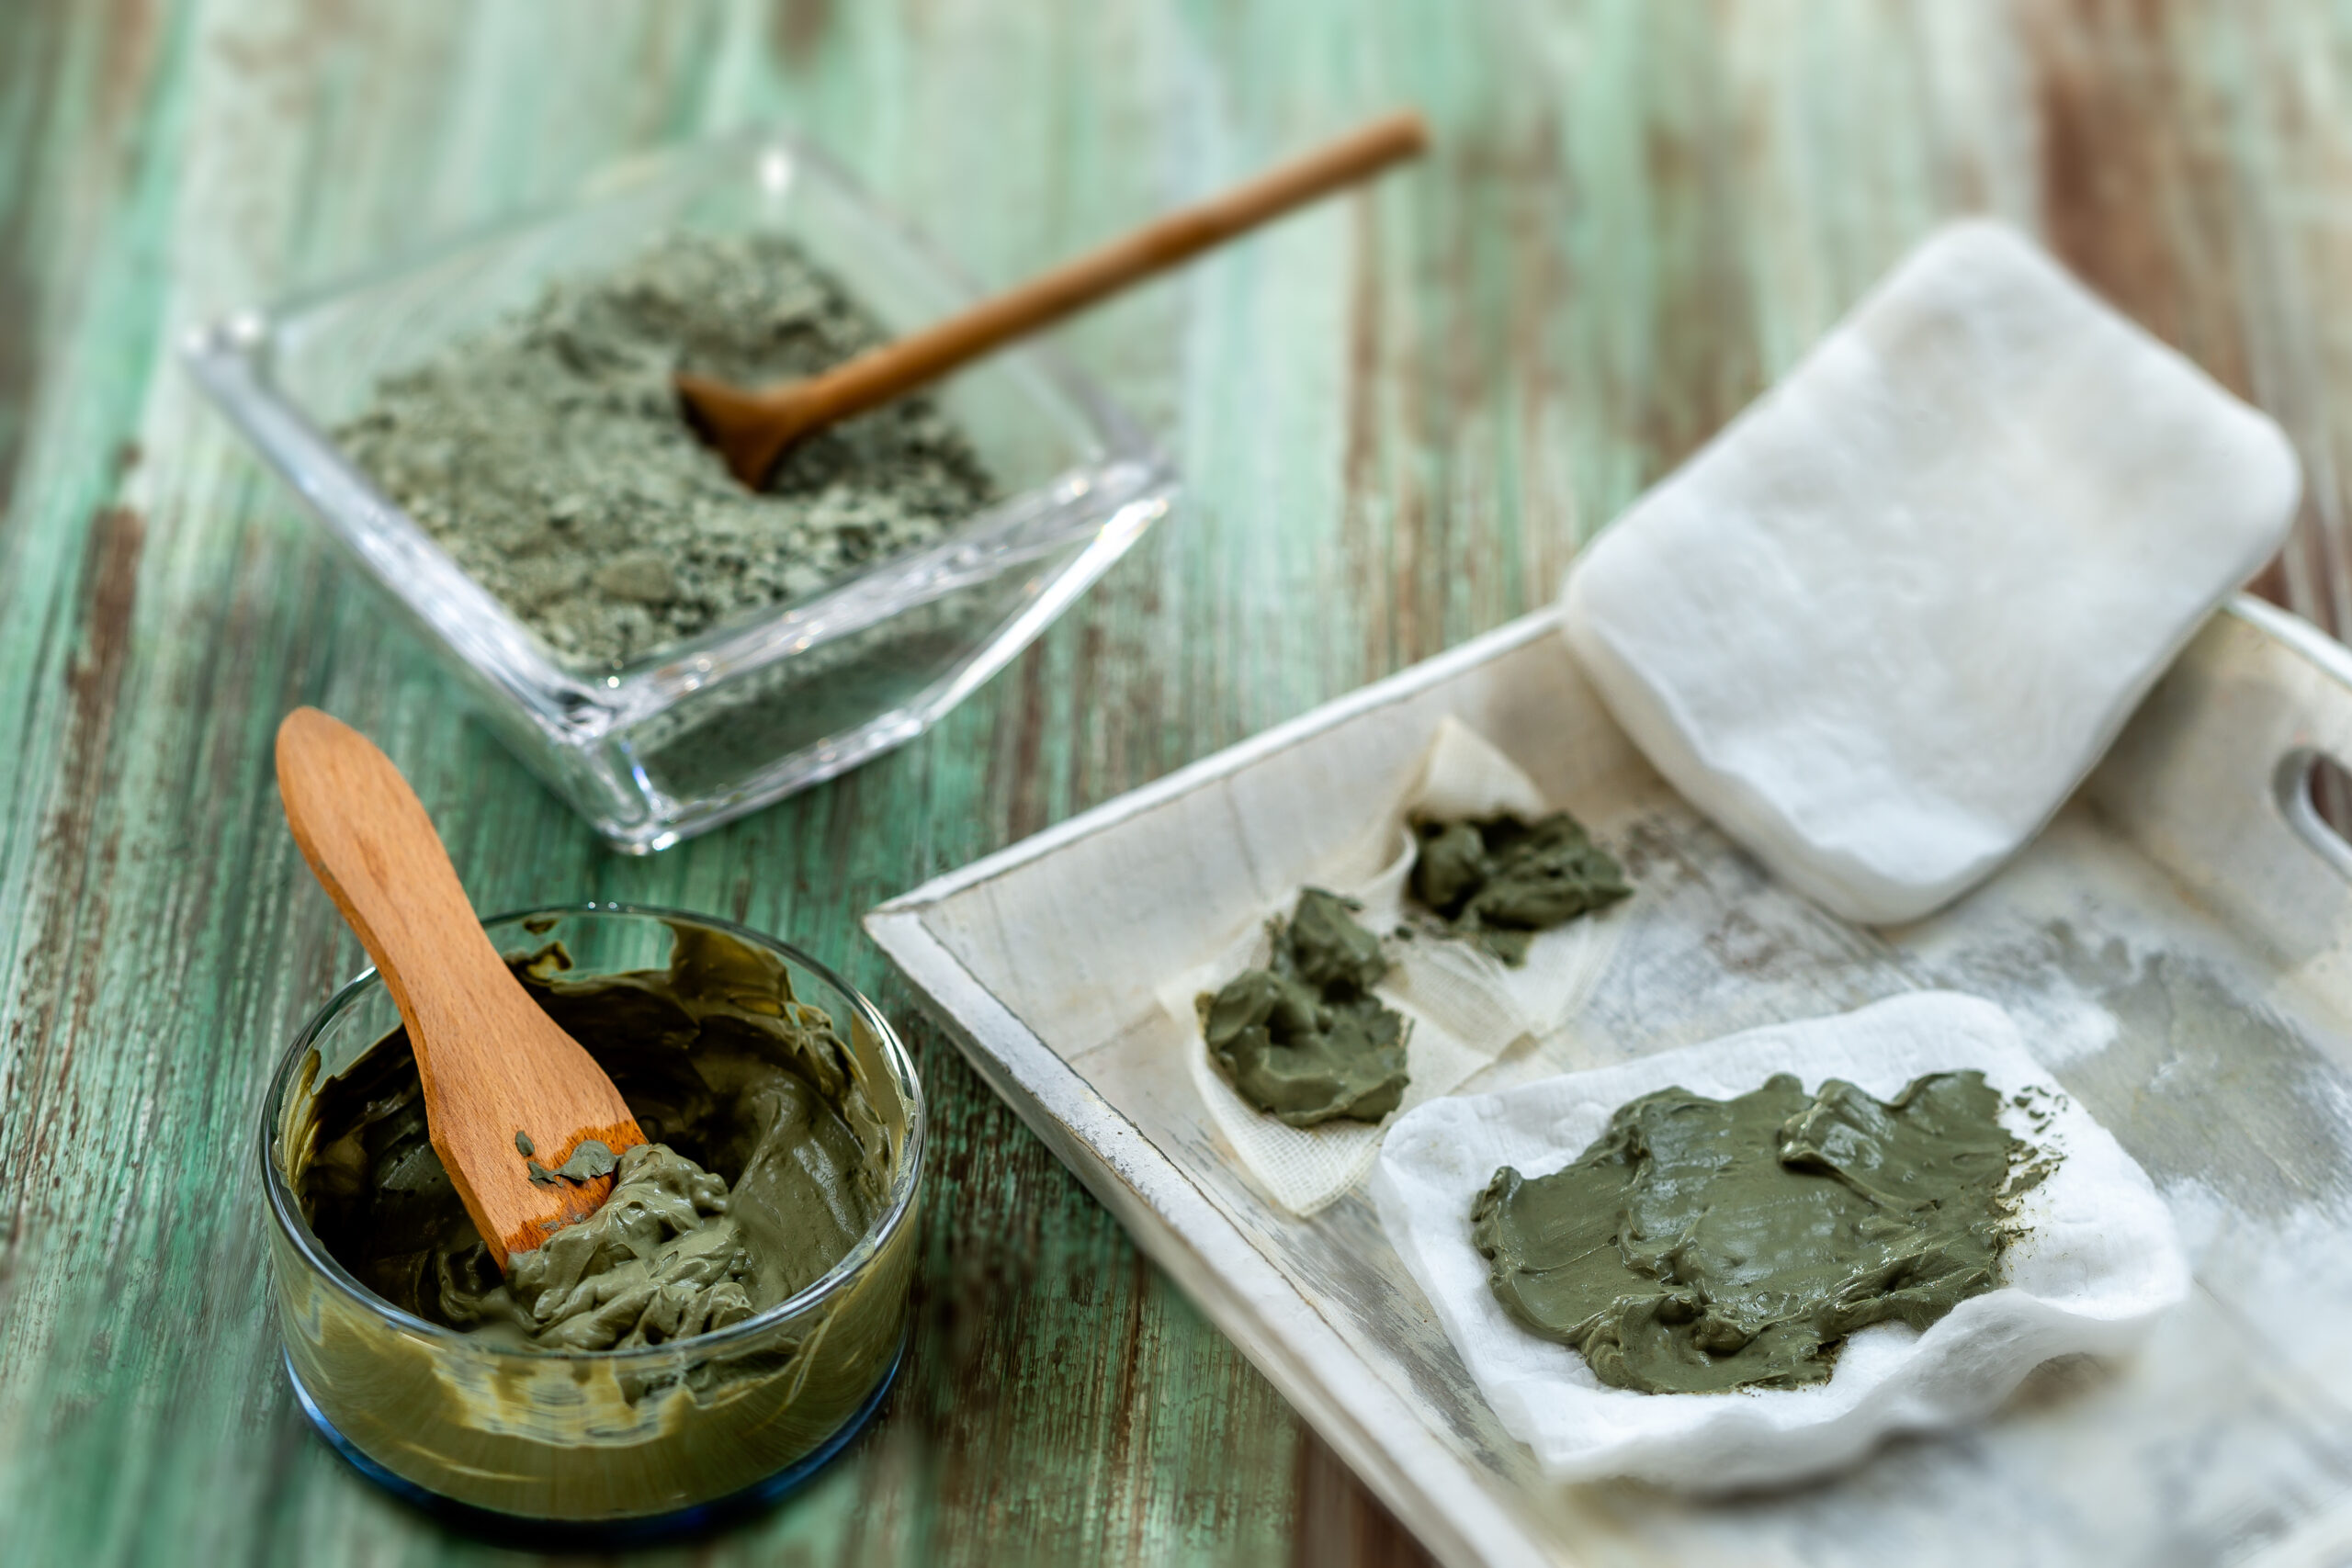 Clay Spa and medical concept: Clay Poultice Use It to Relieve Inflammation,for abscess,cyst,arthritis,Skincare benefit